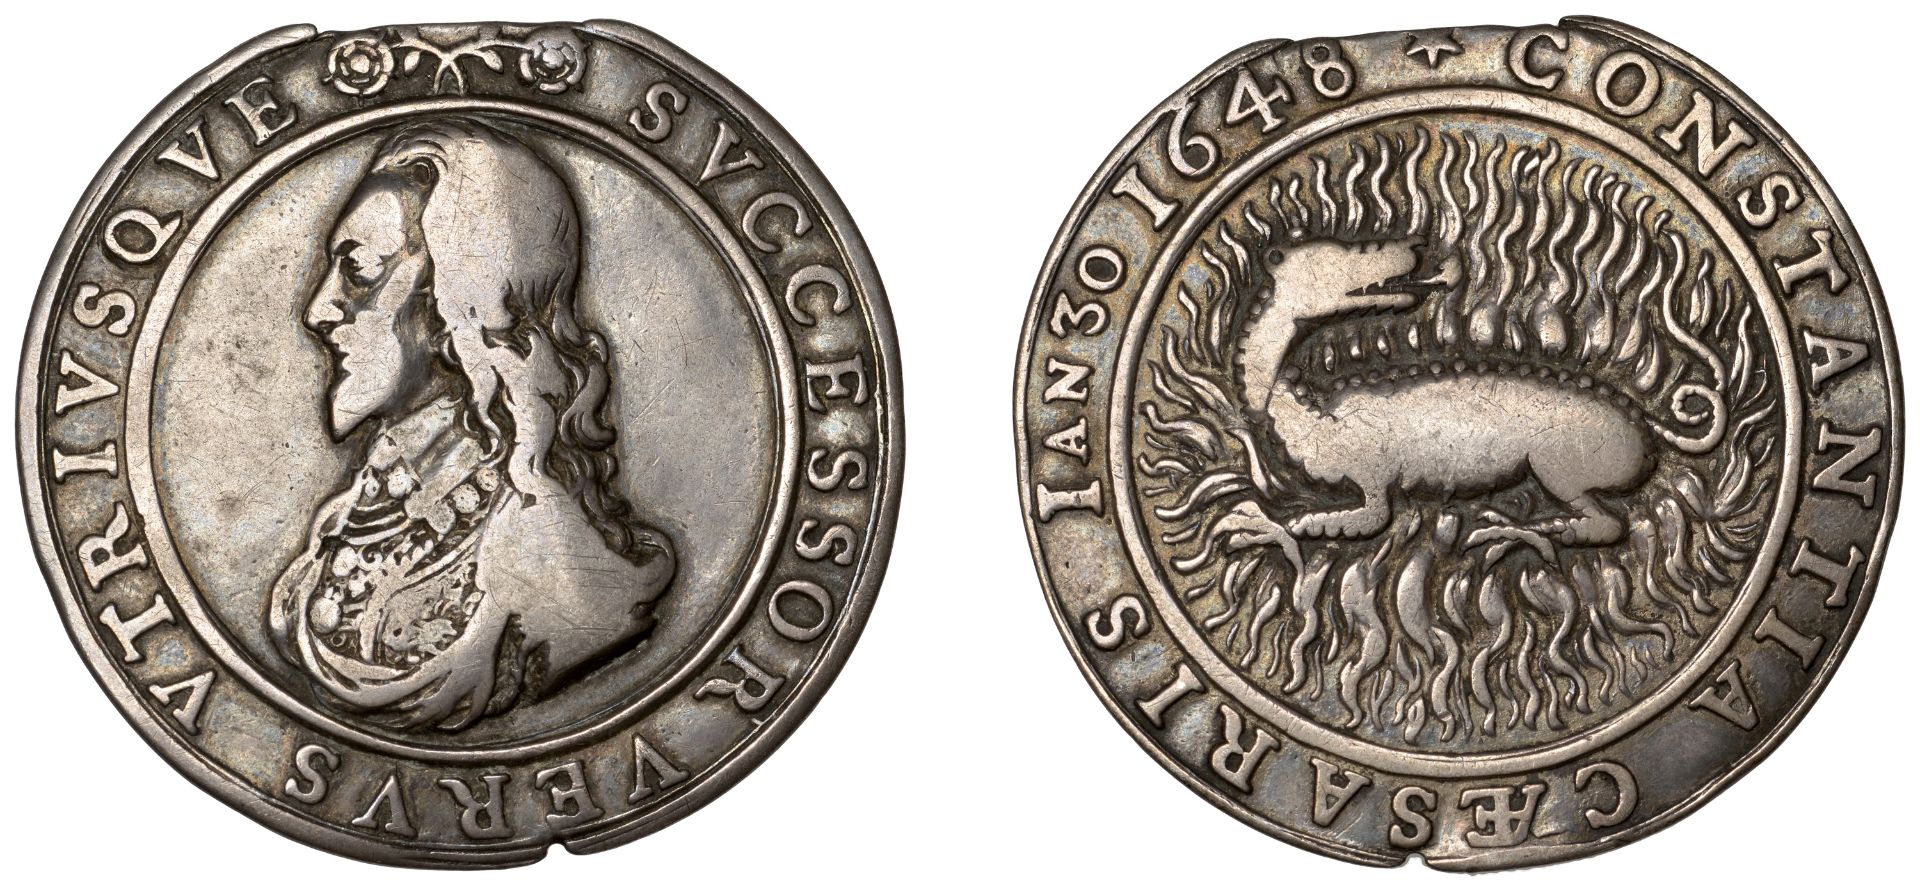 Death of Charles I, 1649, a silver medal, unsigned [probably by T. Rawlins], bare-headed cui...